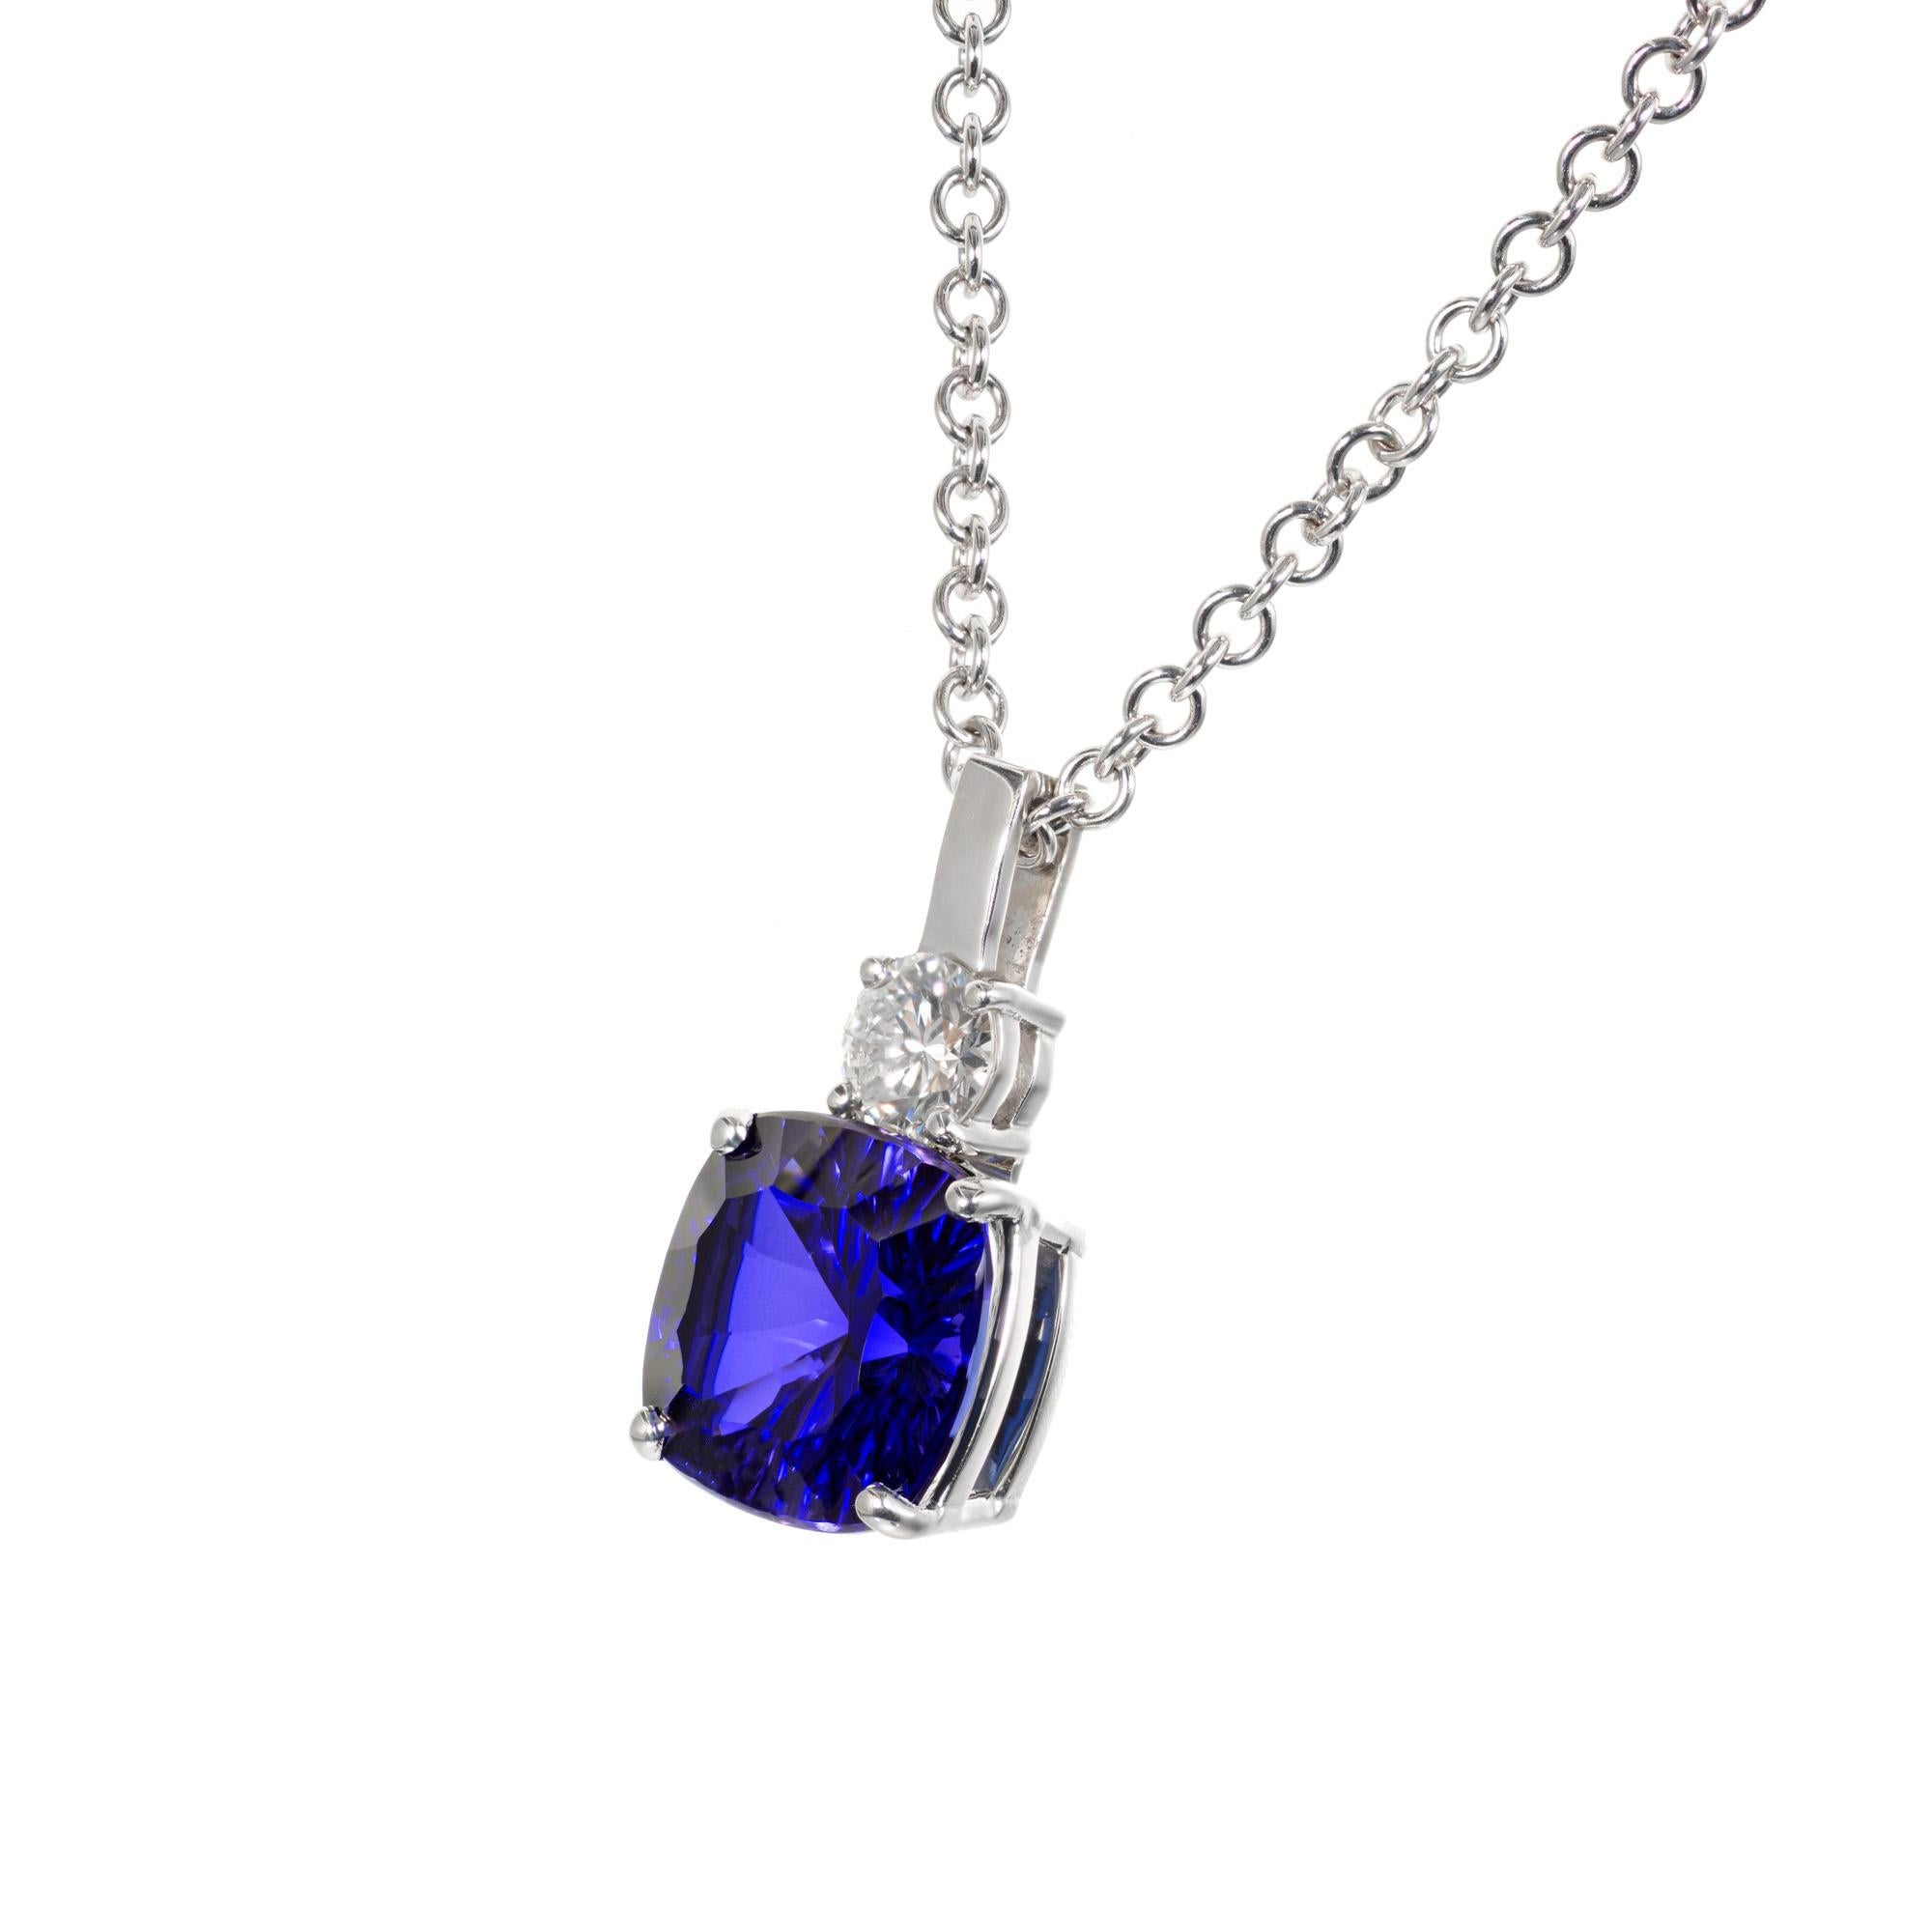 Cushion shape 5.07 carat bright purple blue tanzanite, accented by one round brilliant cut diamond in a 14k white gold setting and chain.  

1 cushion cut blue tanzanite VS2, approx. 5.07cts
1 round brilliant cut diamond H-I VS2, approx. .38cts
14k